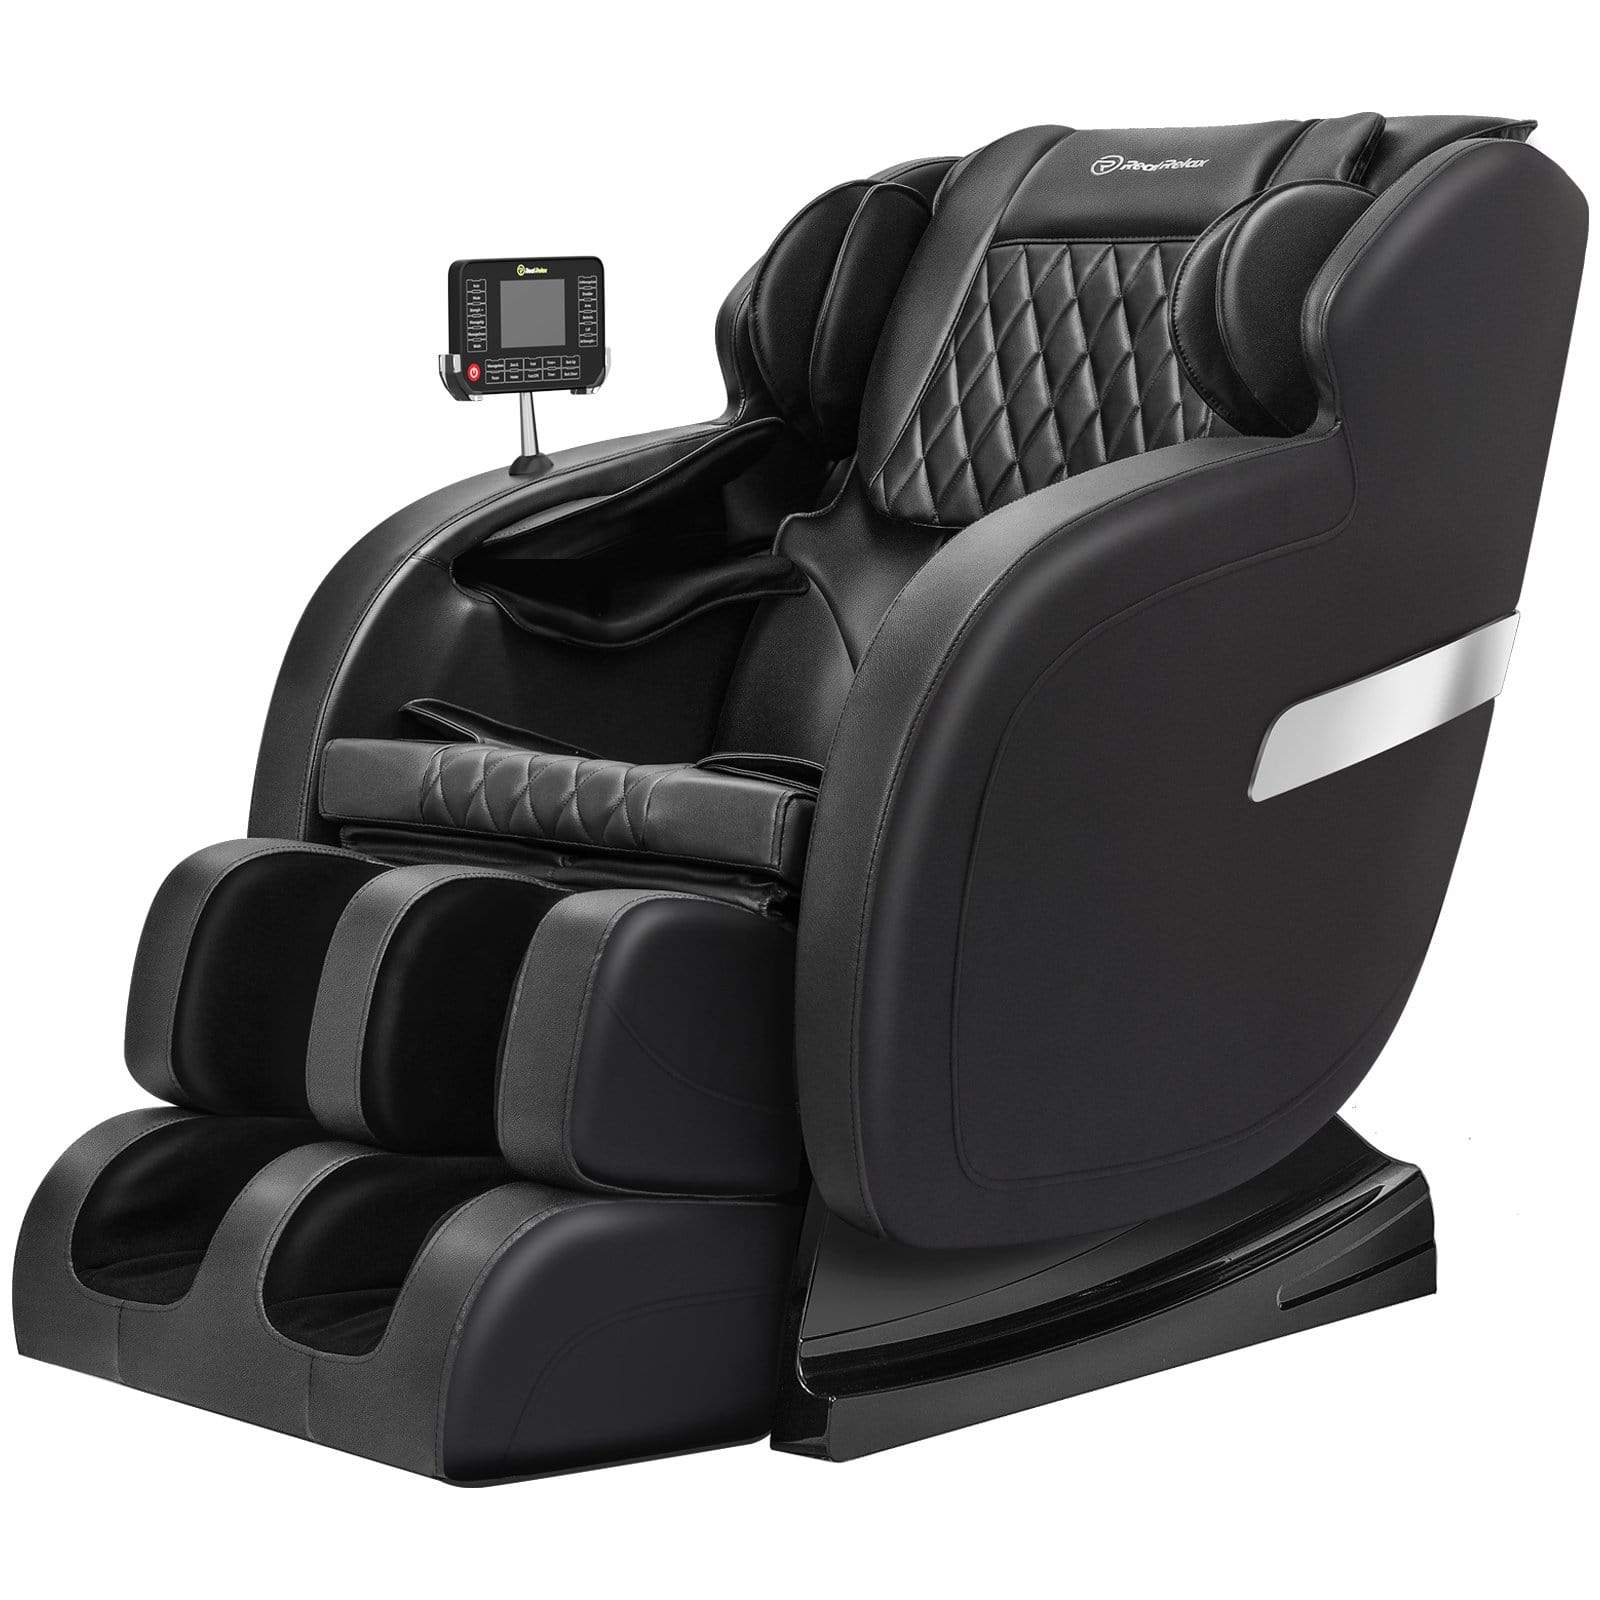 Real Relax Massage Chair Real Relax® Favor-05  Massage Chair black Refurbished